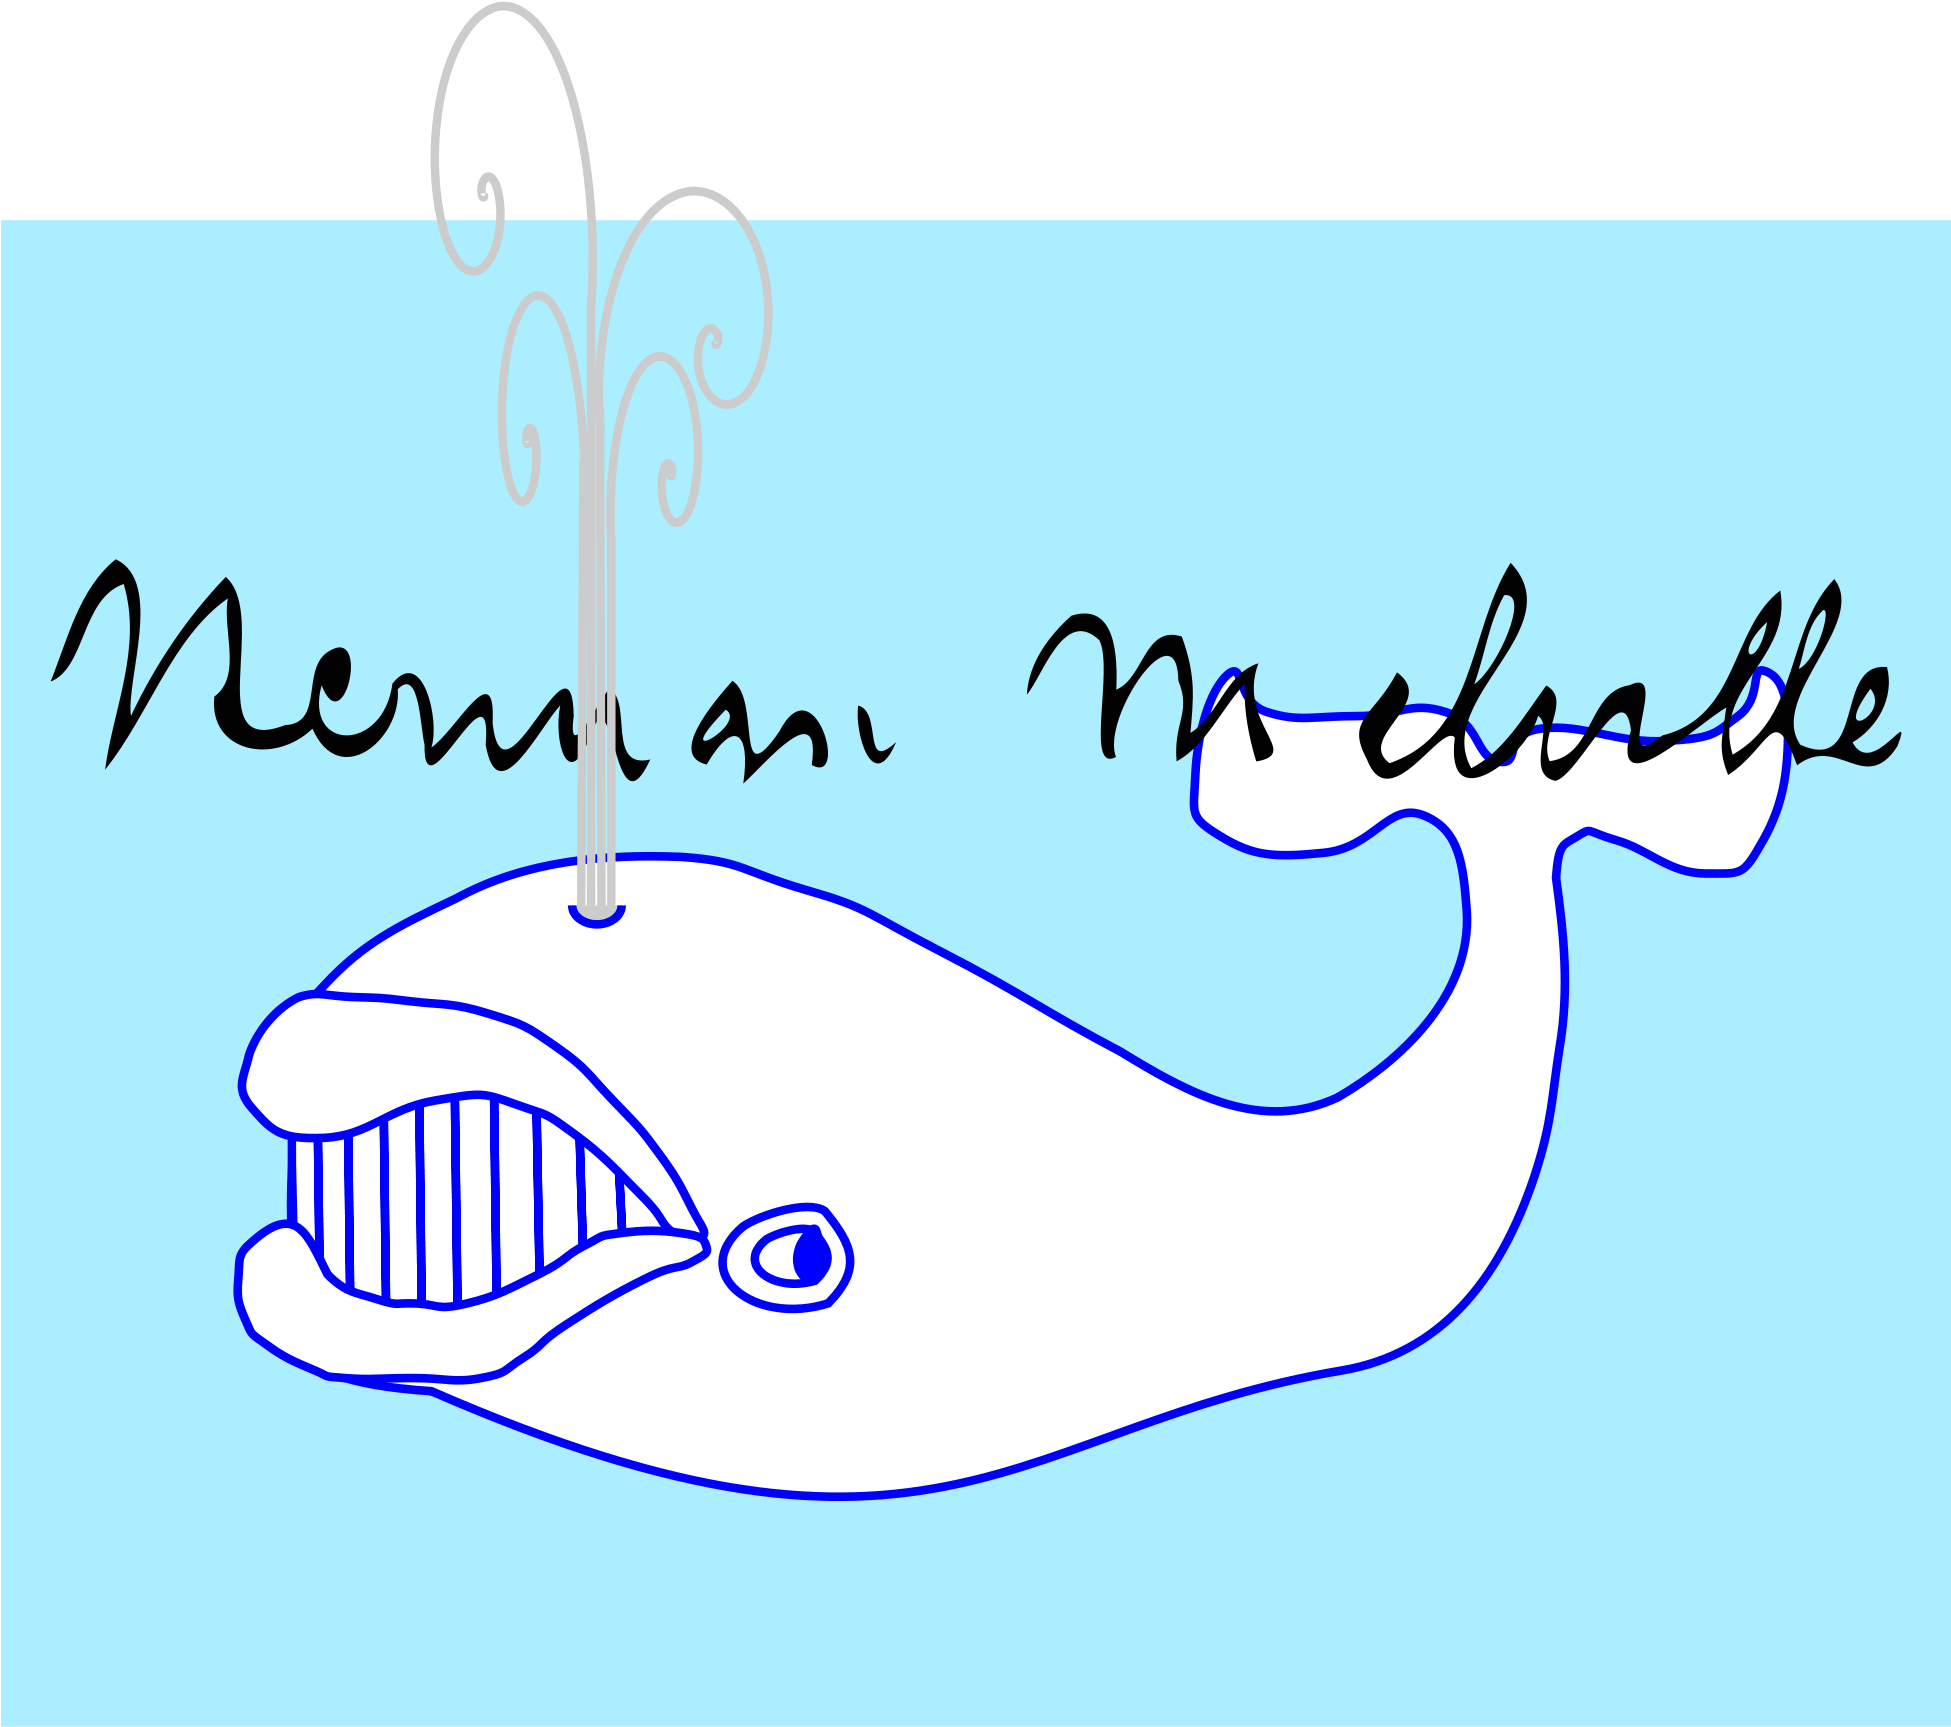 Herman Melville Signature Moby Dick - Moby-dick (2000x1788)